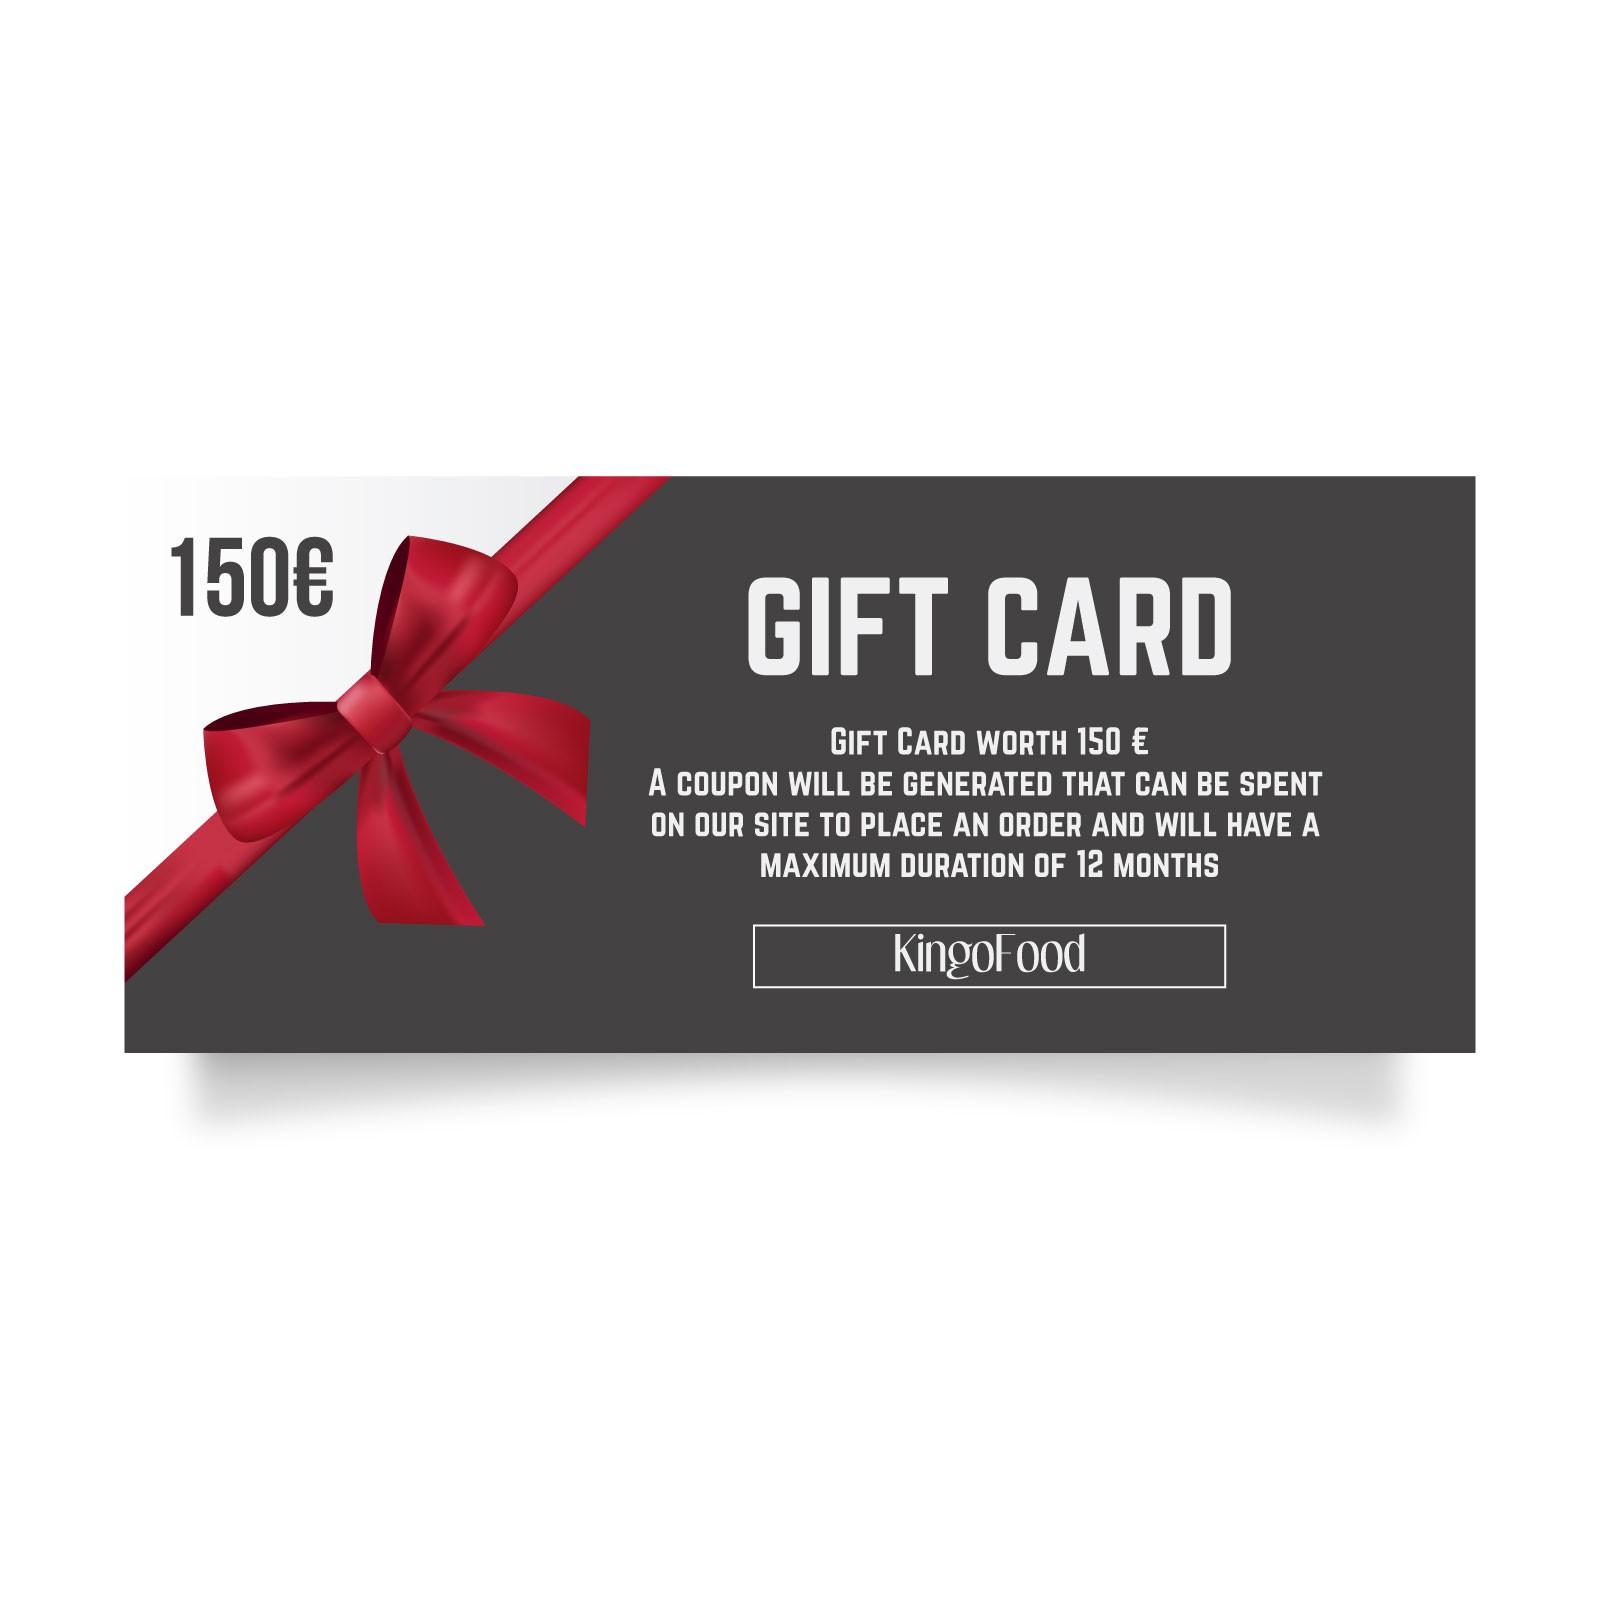 Gift Card worth 150 €
A coupon will be generated which can be spent on the website www.kingofood.com to place an order and will have a maximum duration of 24 months.
For more information you can contact us!